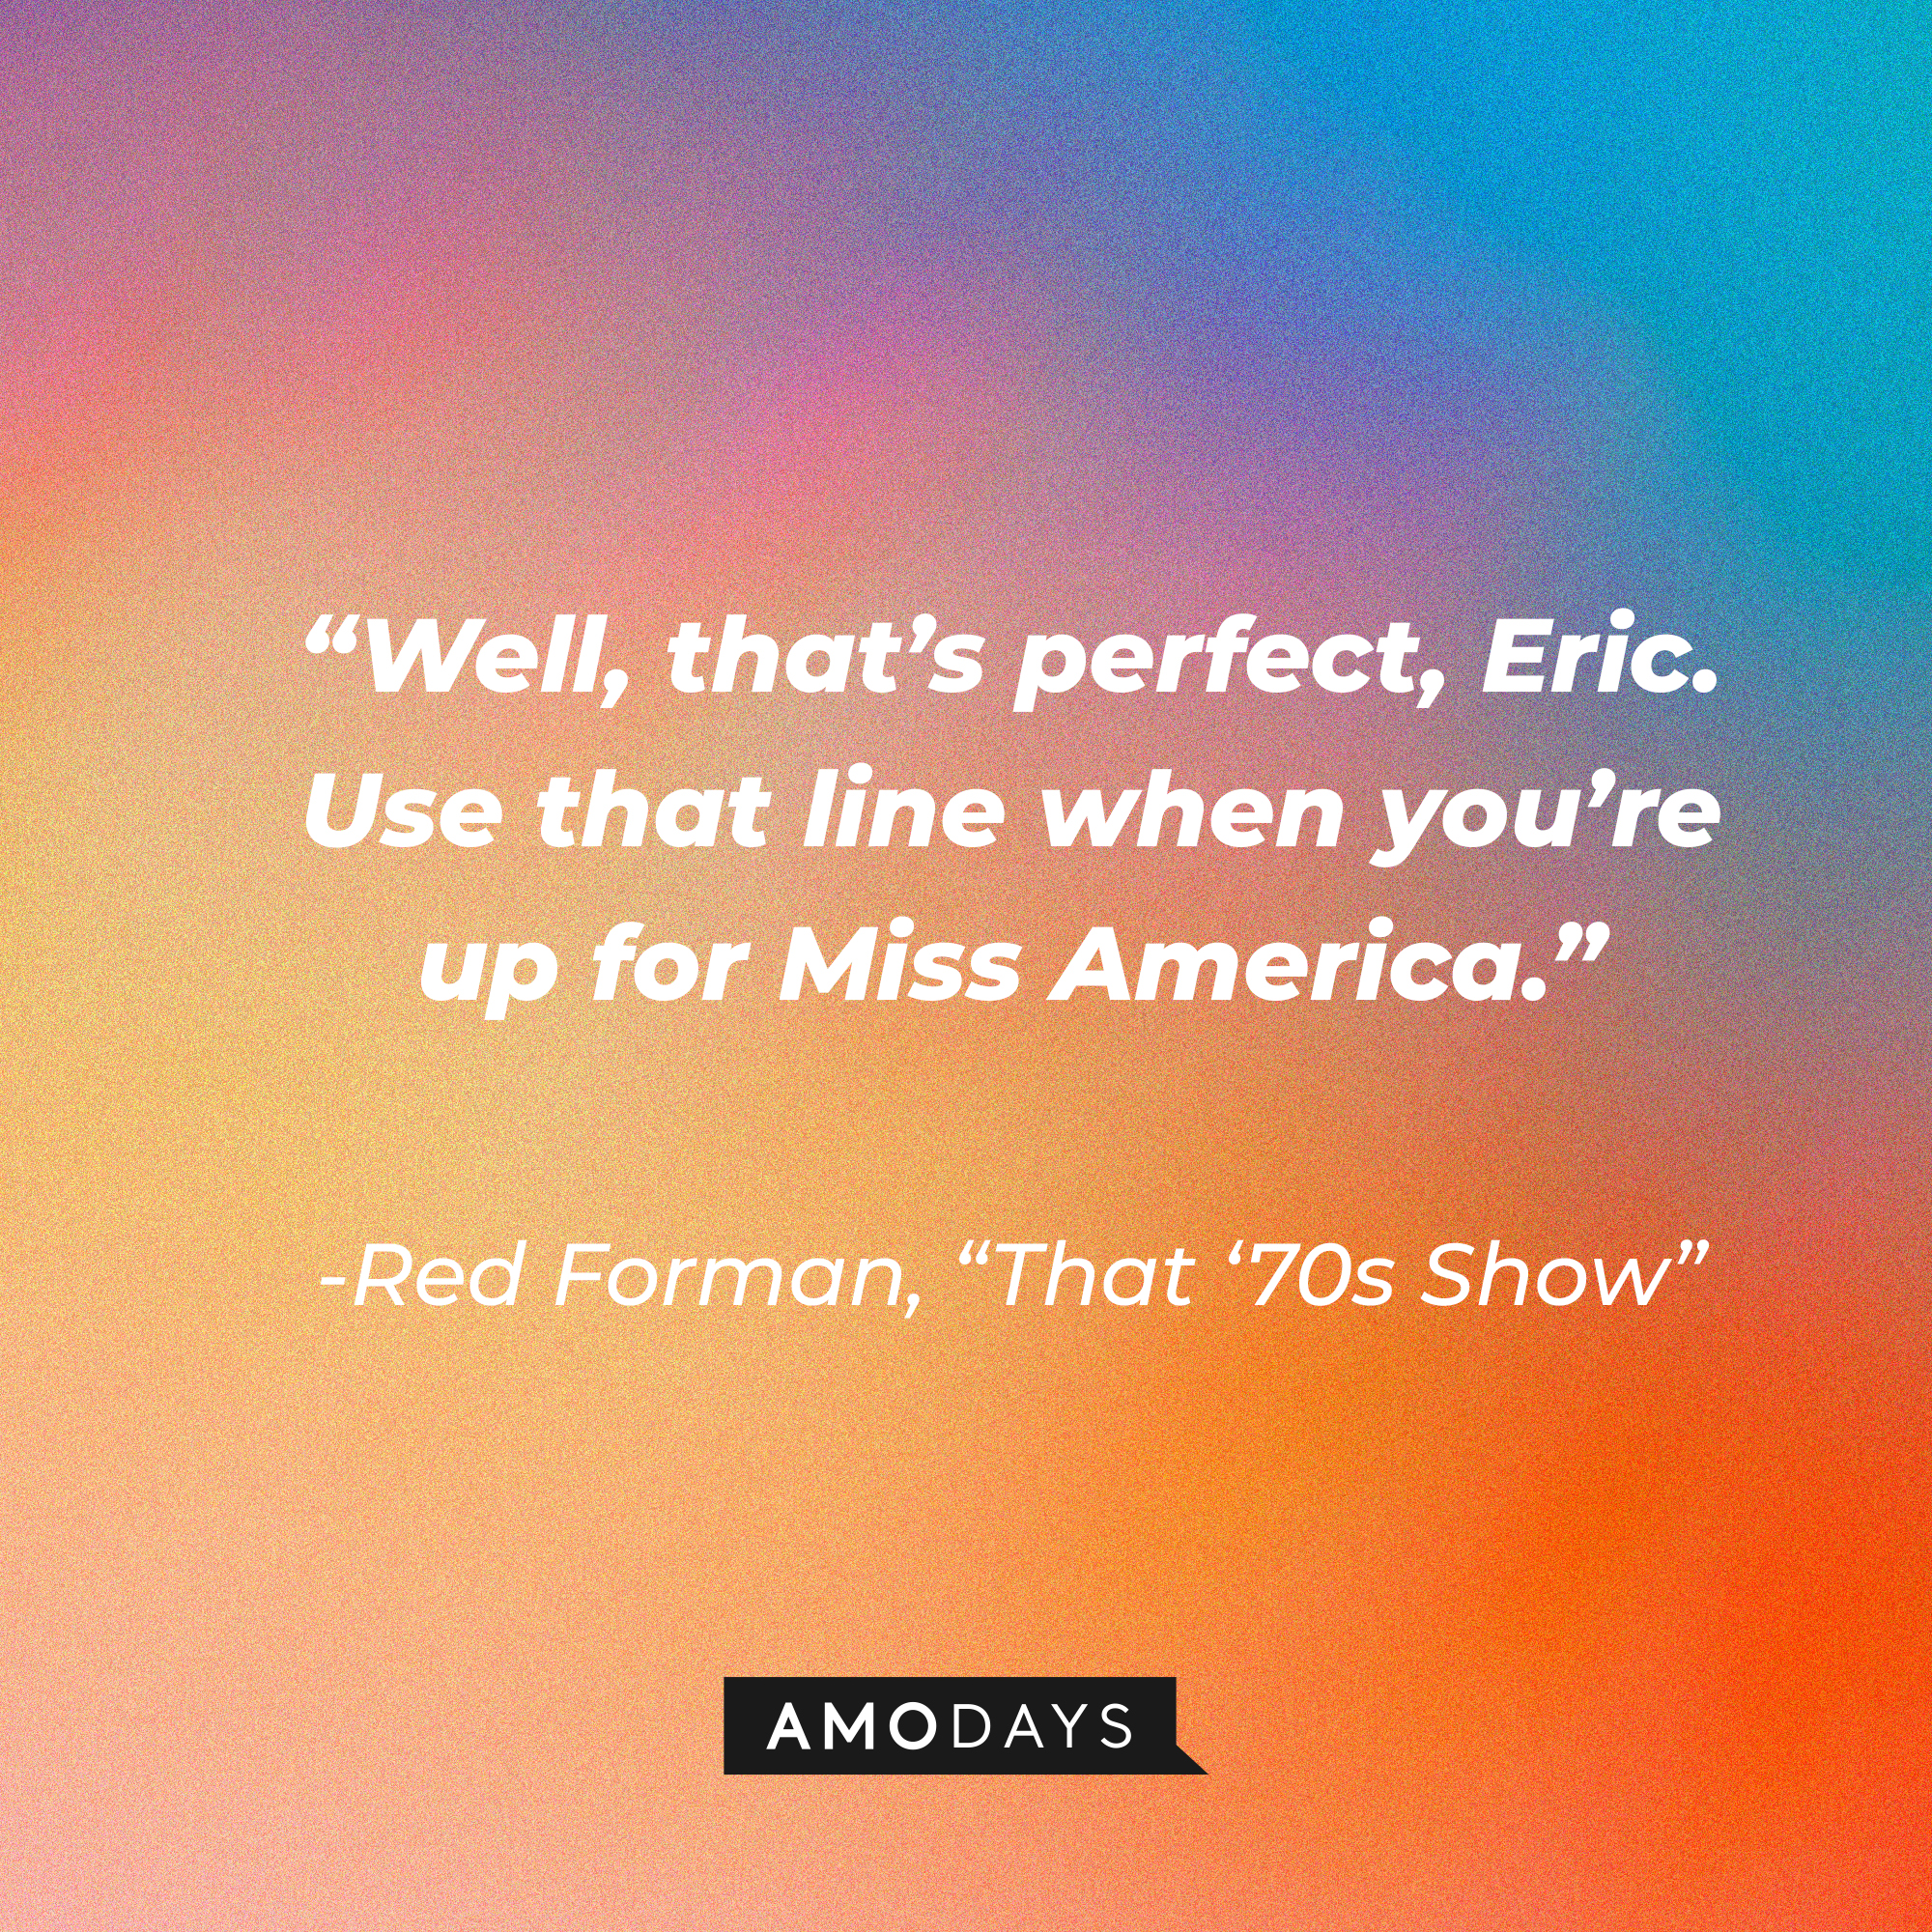 Red Forman's quote from "That '70s Show:" "Well, that’s perfect, Eric. Use that line when you’re up for Miss America.” | Source: AmoDays